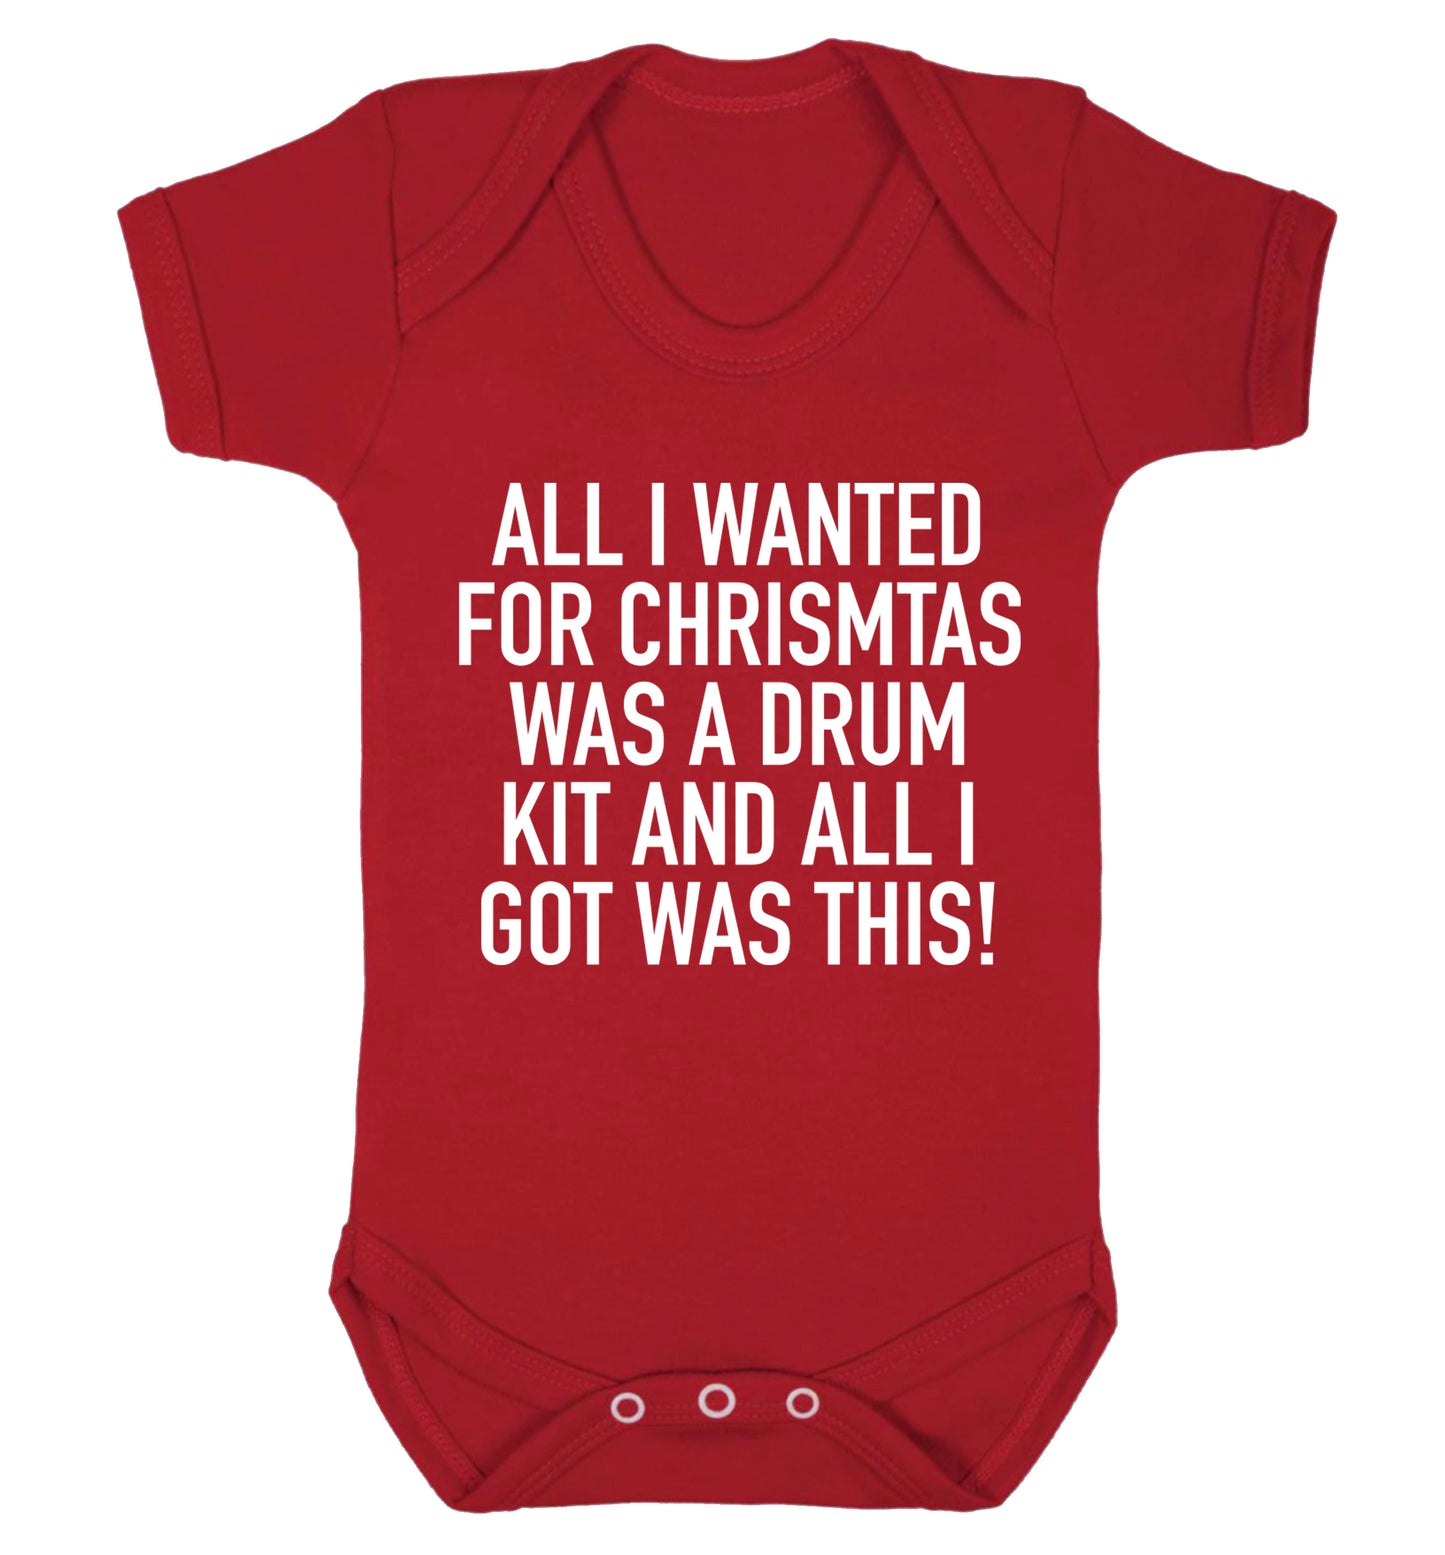 All I wanted for Christmas was a drum kit and all I got was this! Baby Vest red 18-24 months